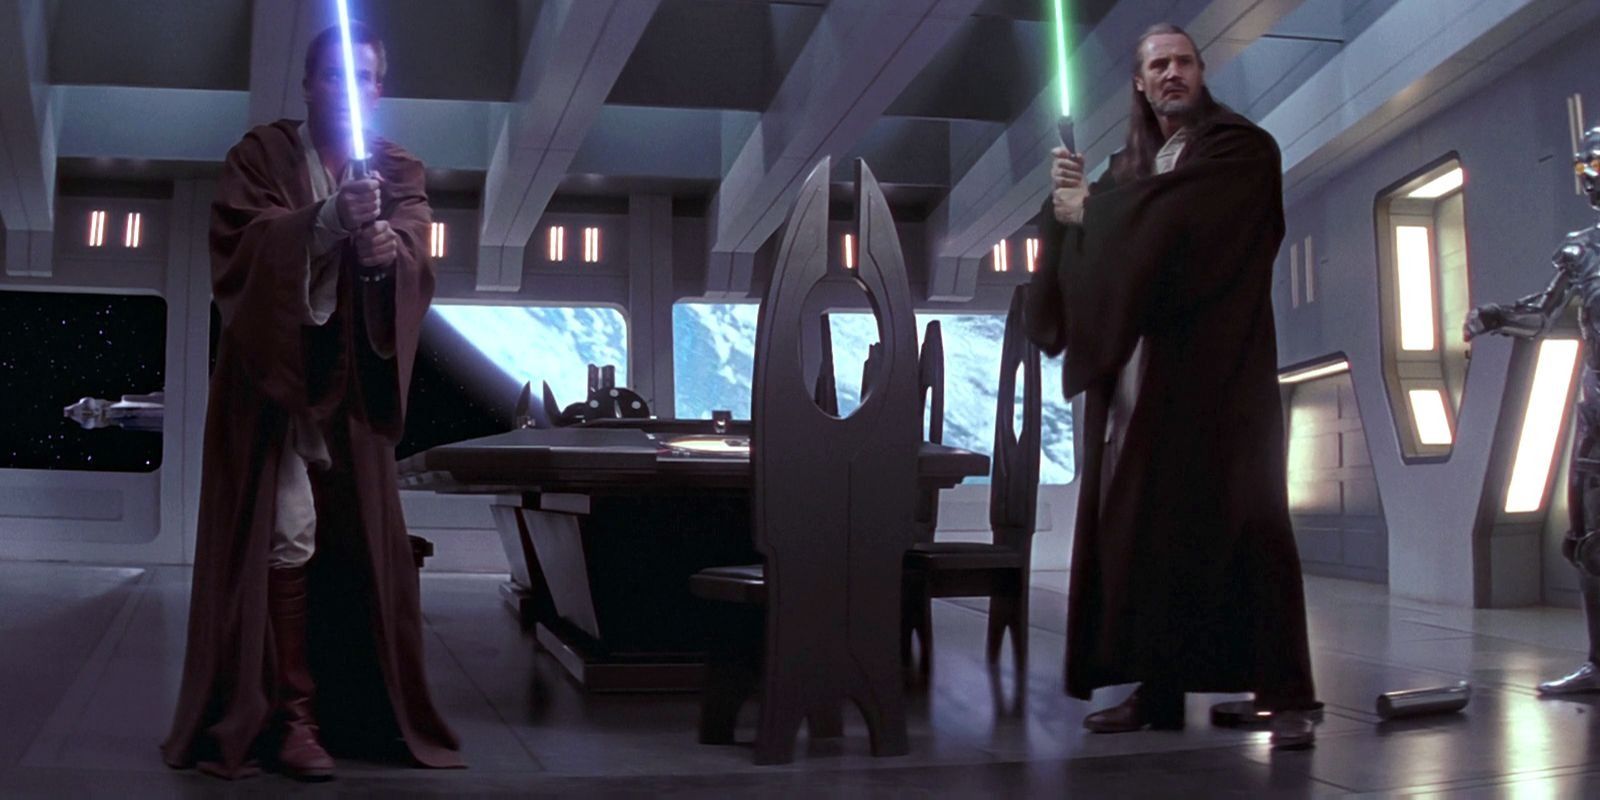 Star Wars 10 Best Quotes From The Phantom Menace To Celebrate The 20th Anniversary